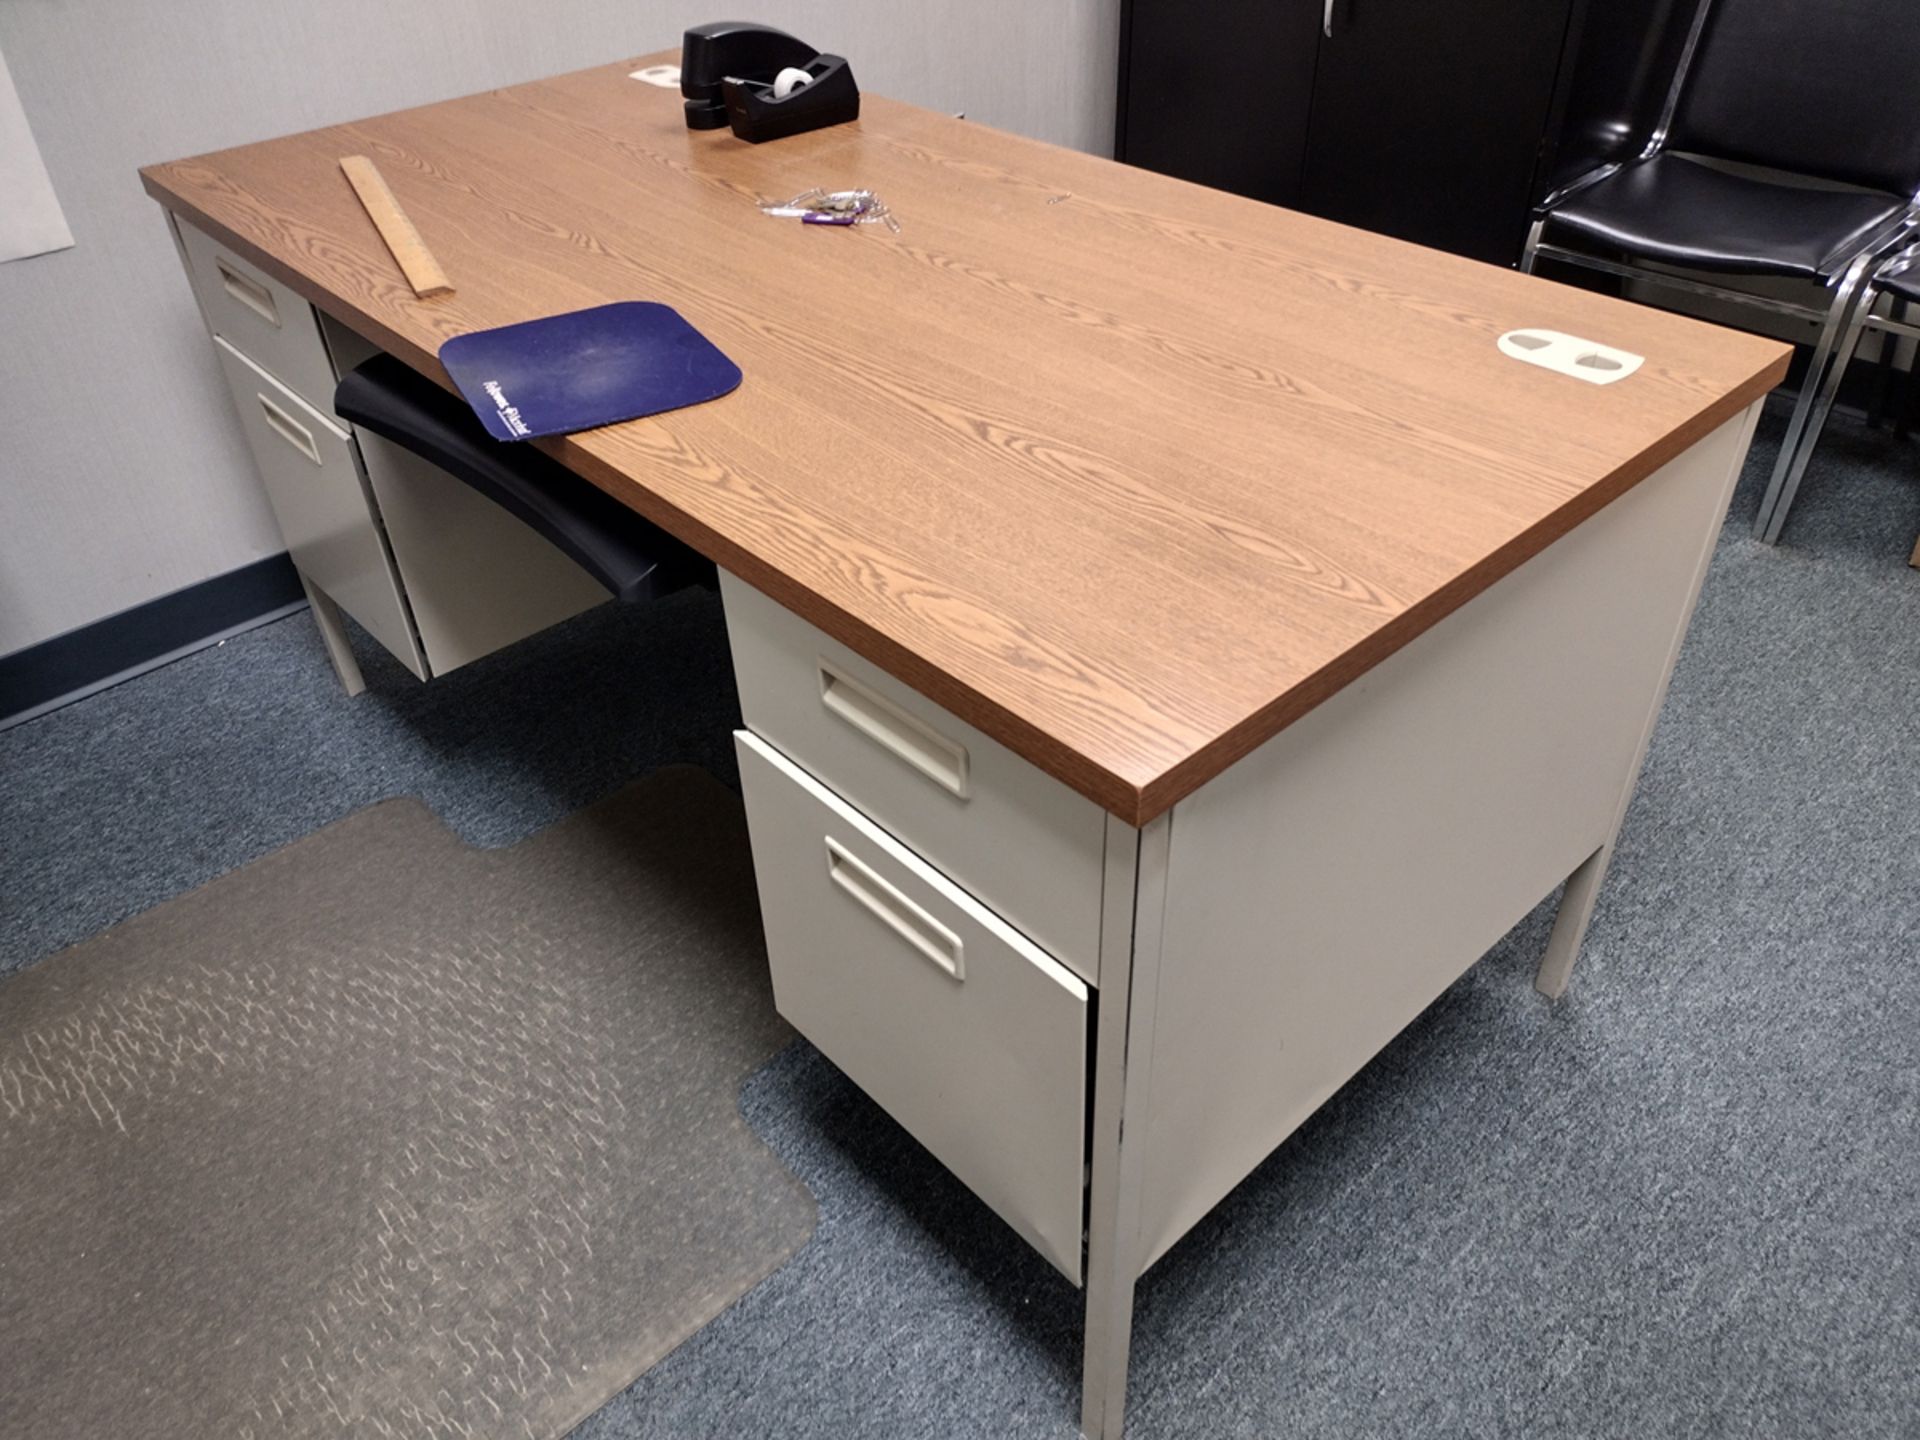 Group of Office Furniture Throughout Rooms - Image 5 of 17